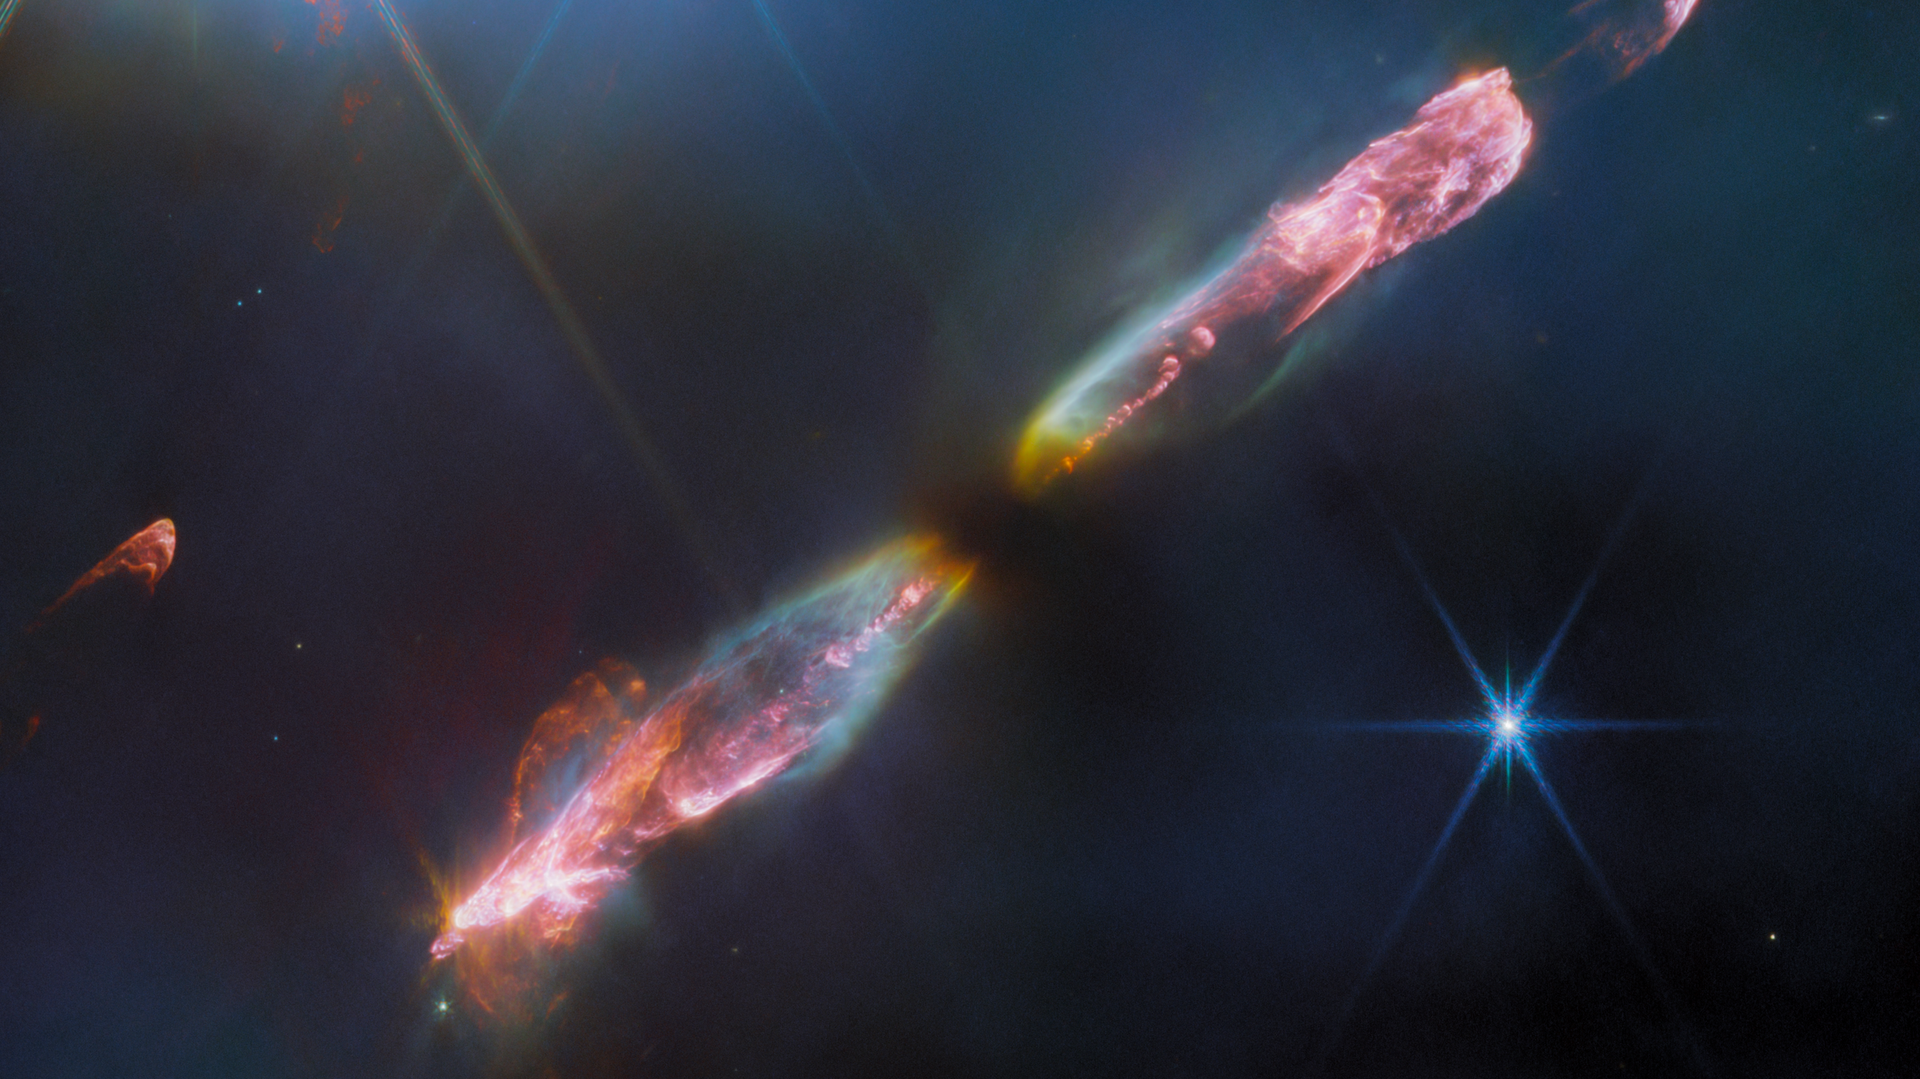 NASA’s James Webb Space Telescope’s high resolution, near-infrared look at Herbig-Haro 211 reveals exquisite detail of the outflow of a young star, an infantile analogue of our Sun. - Sputnik International, 1920, 15.09.2023